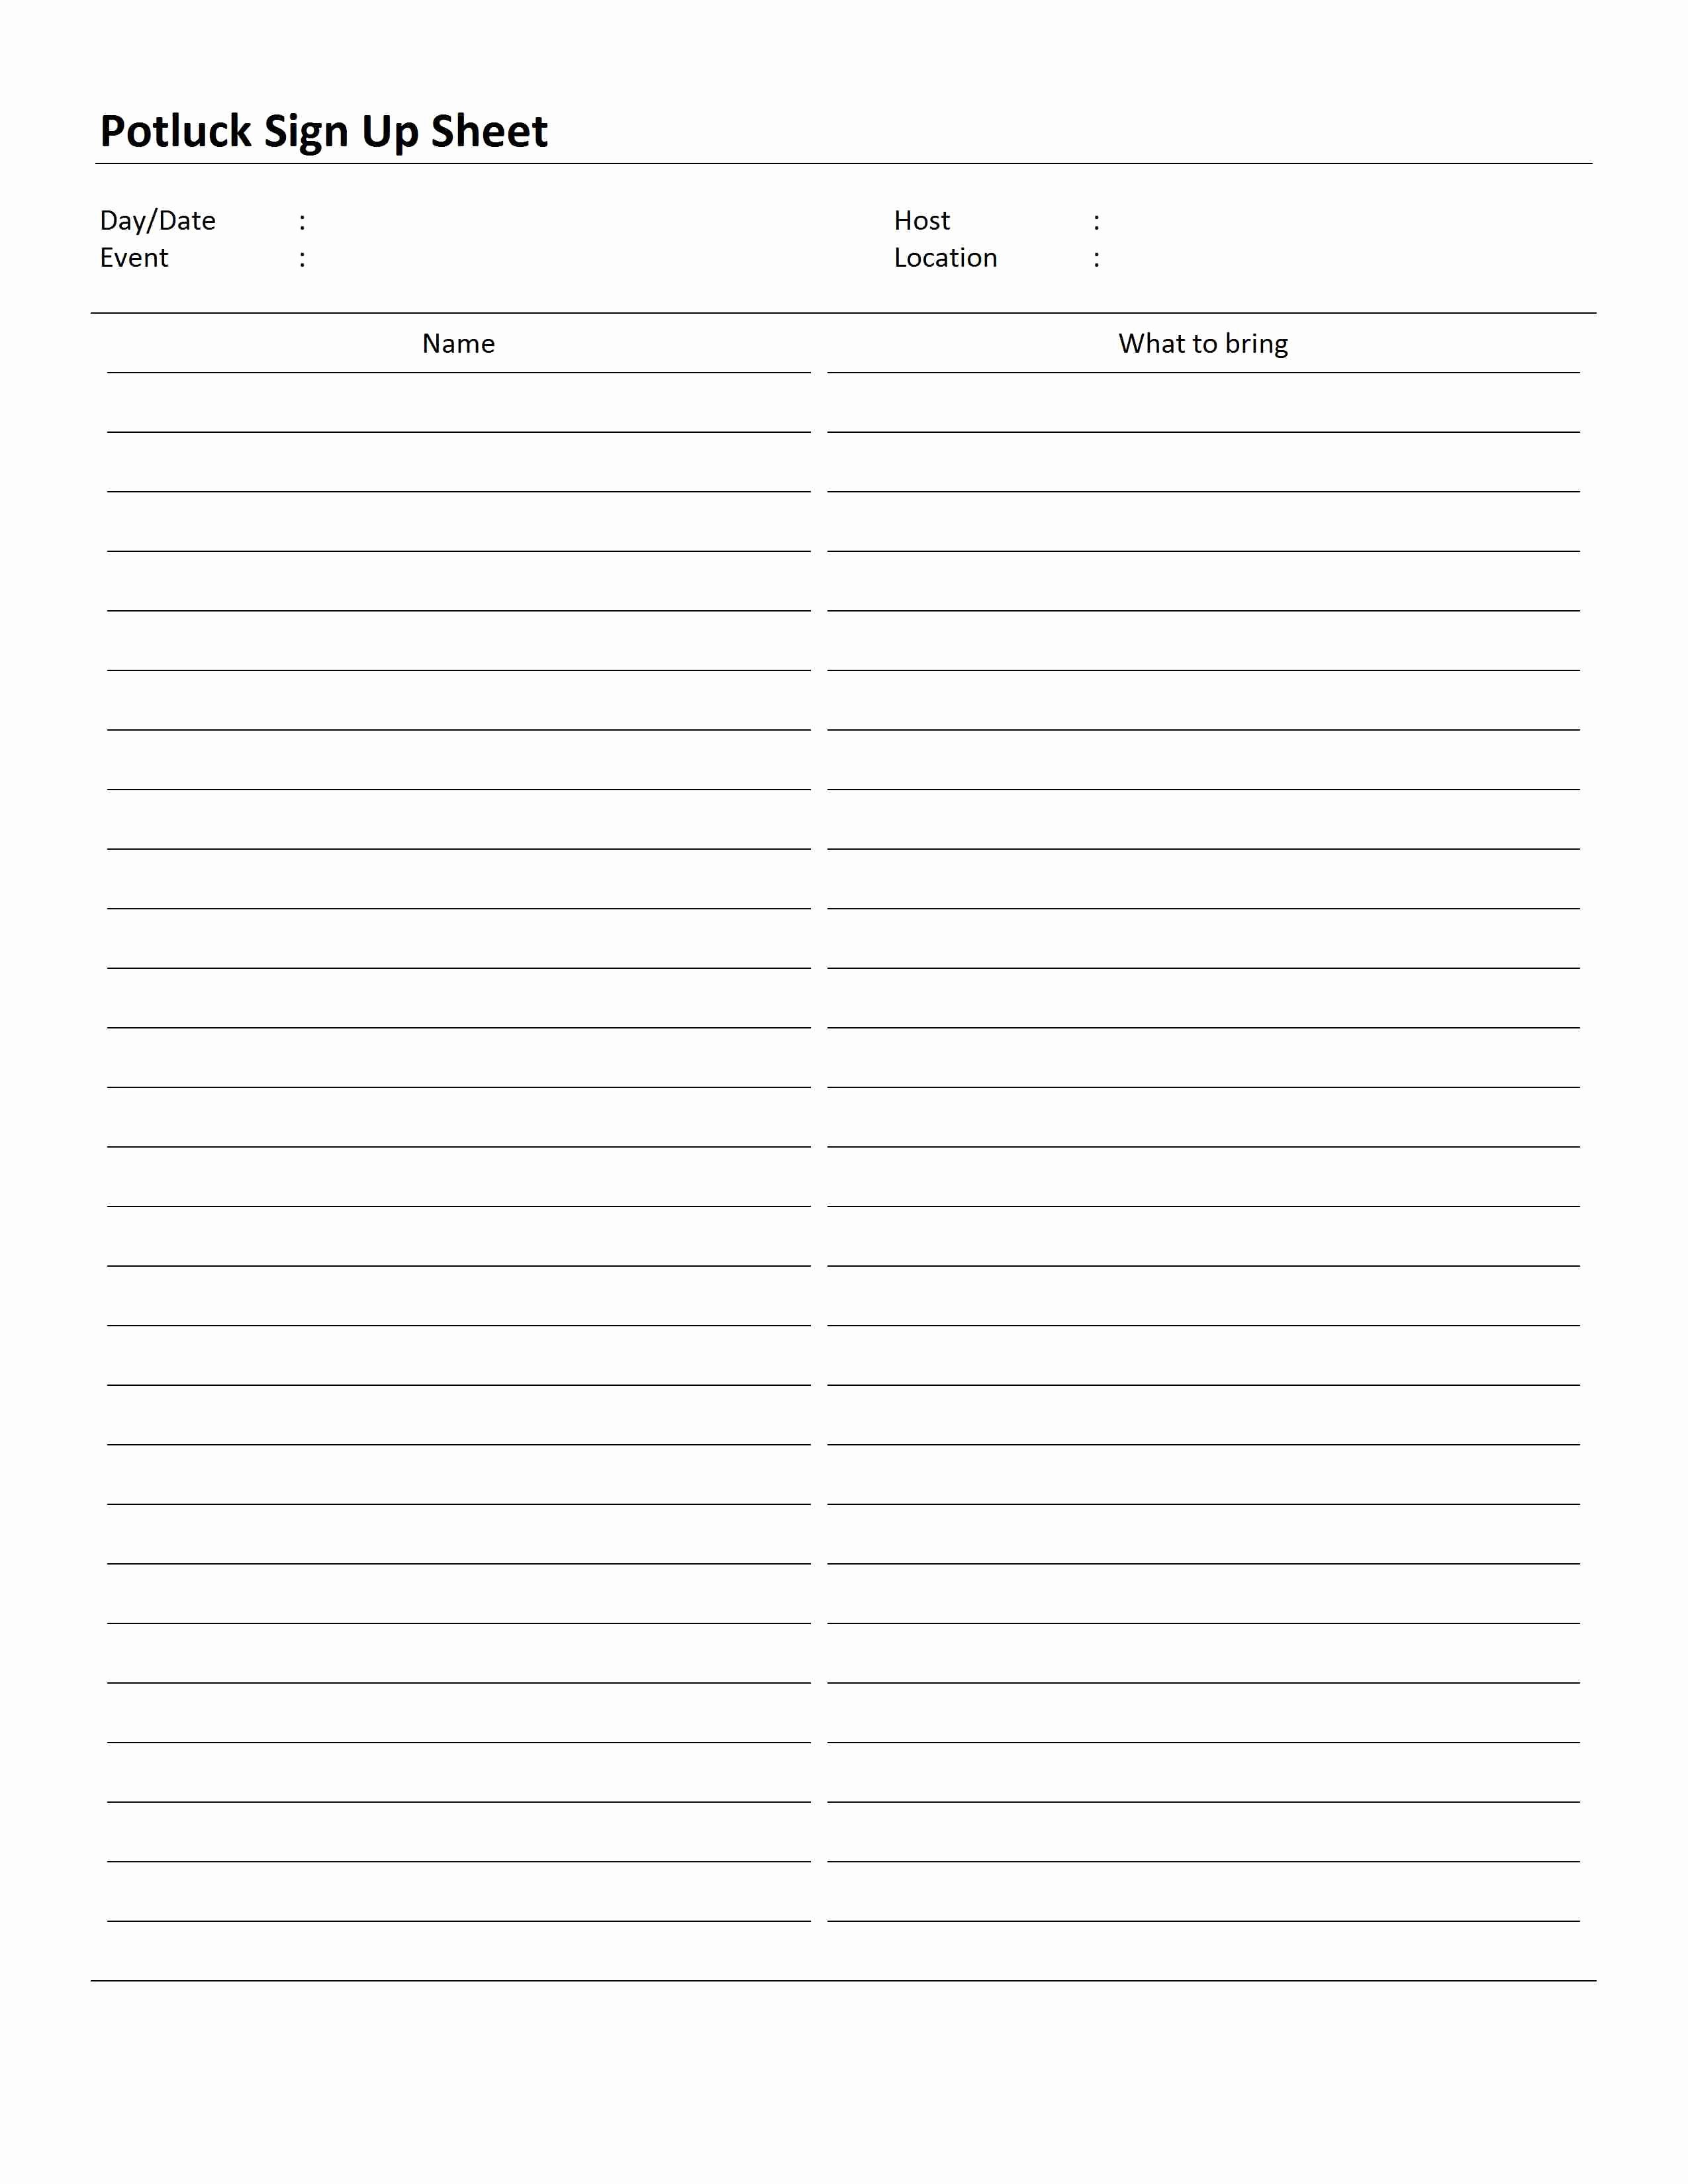 Christmas Sign Up Sheet Templates Best Of Search Results for “christmas Potluck Sign Up Template